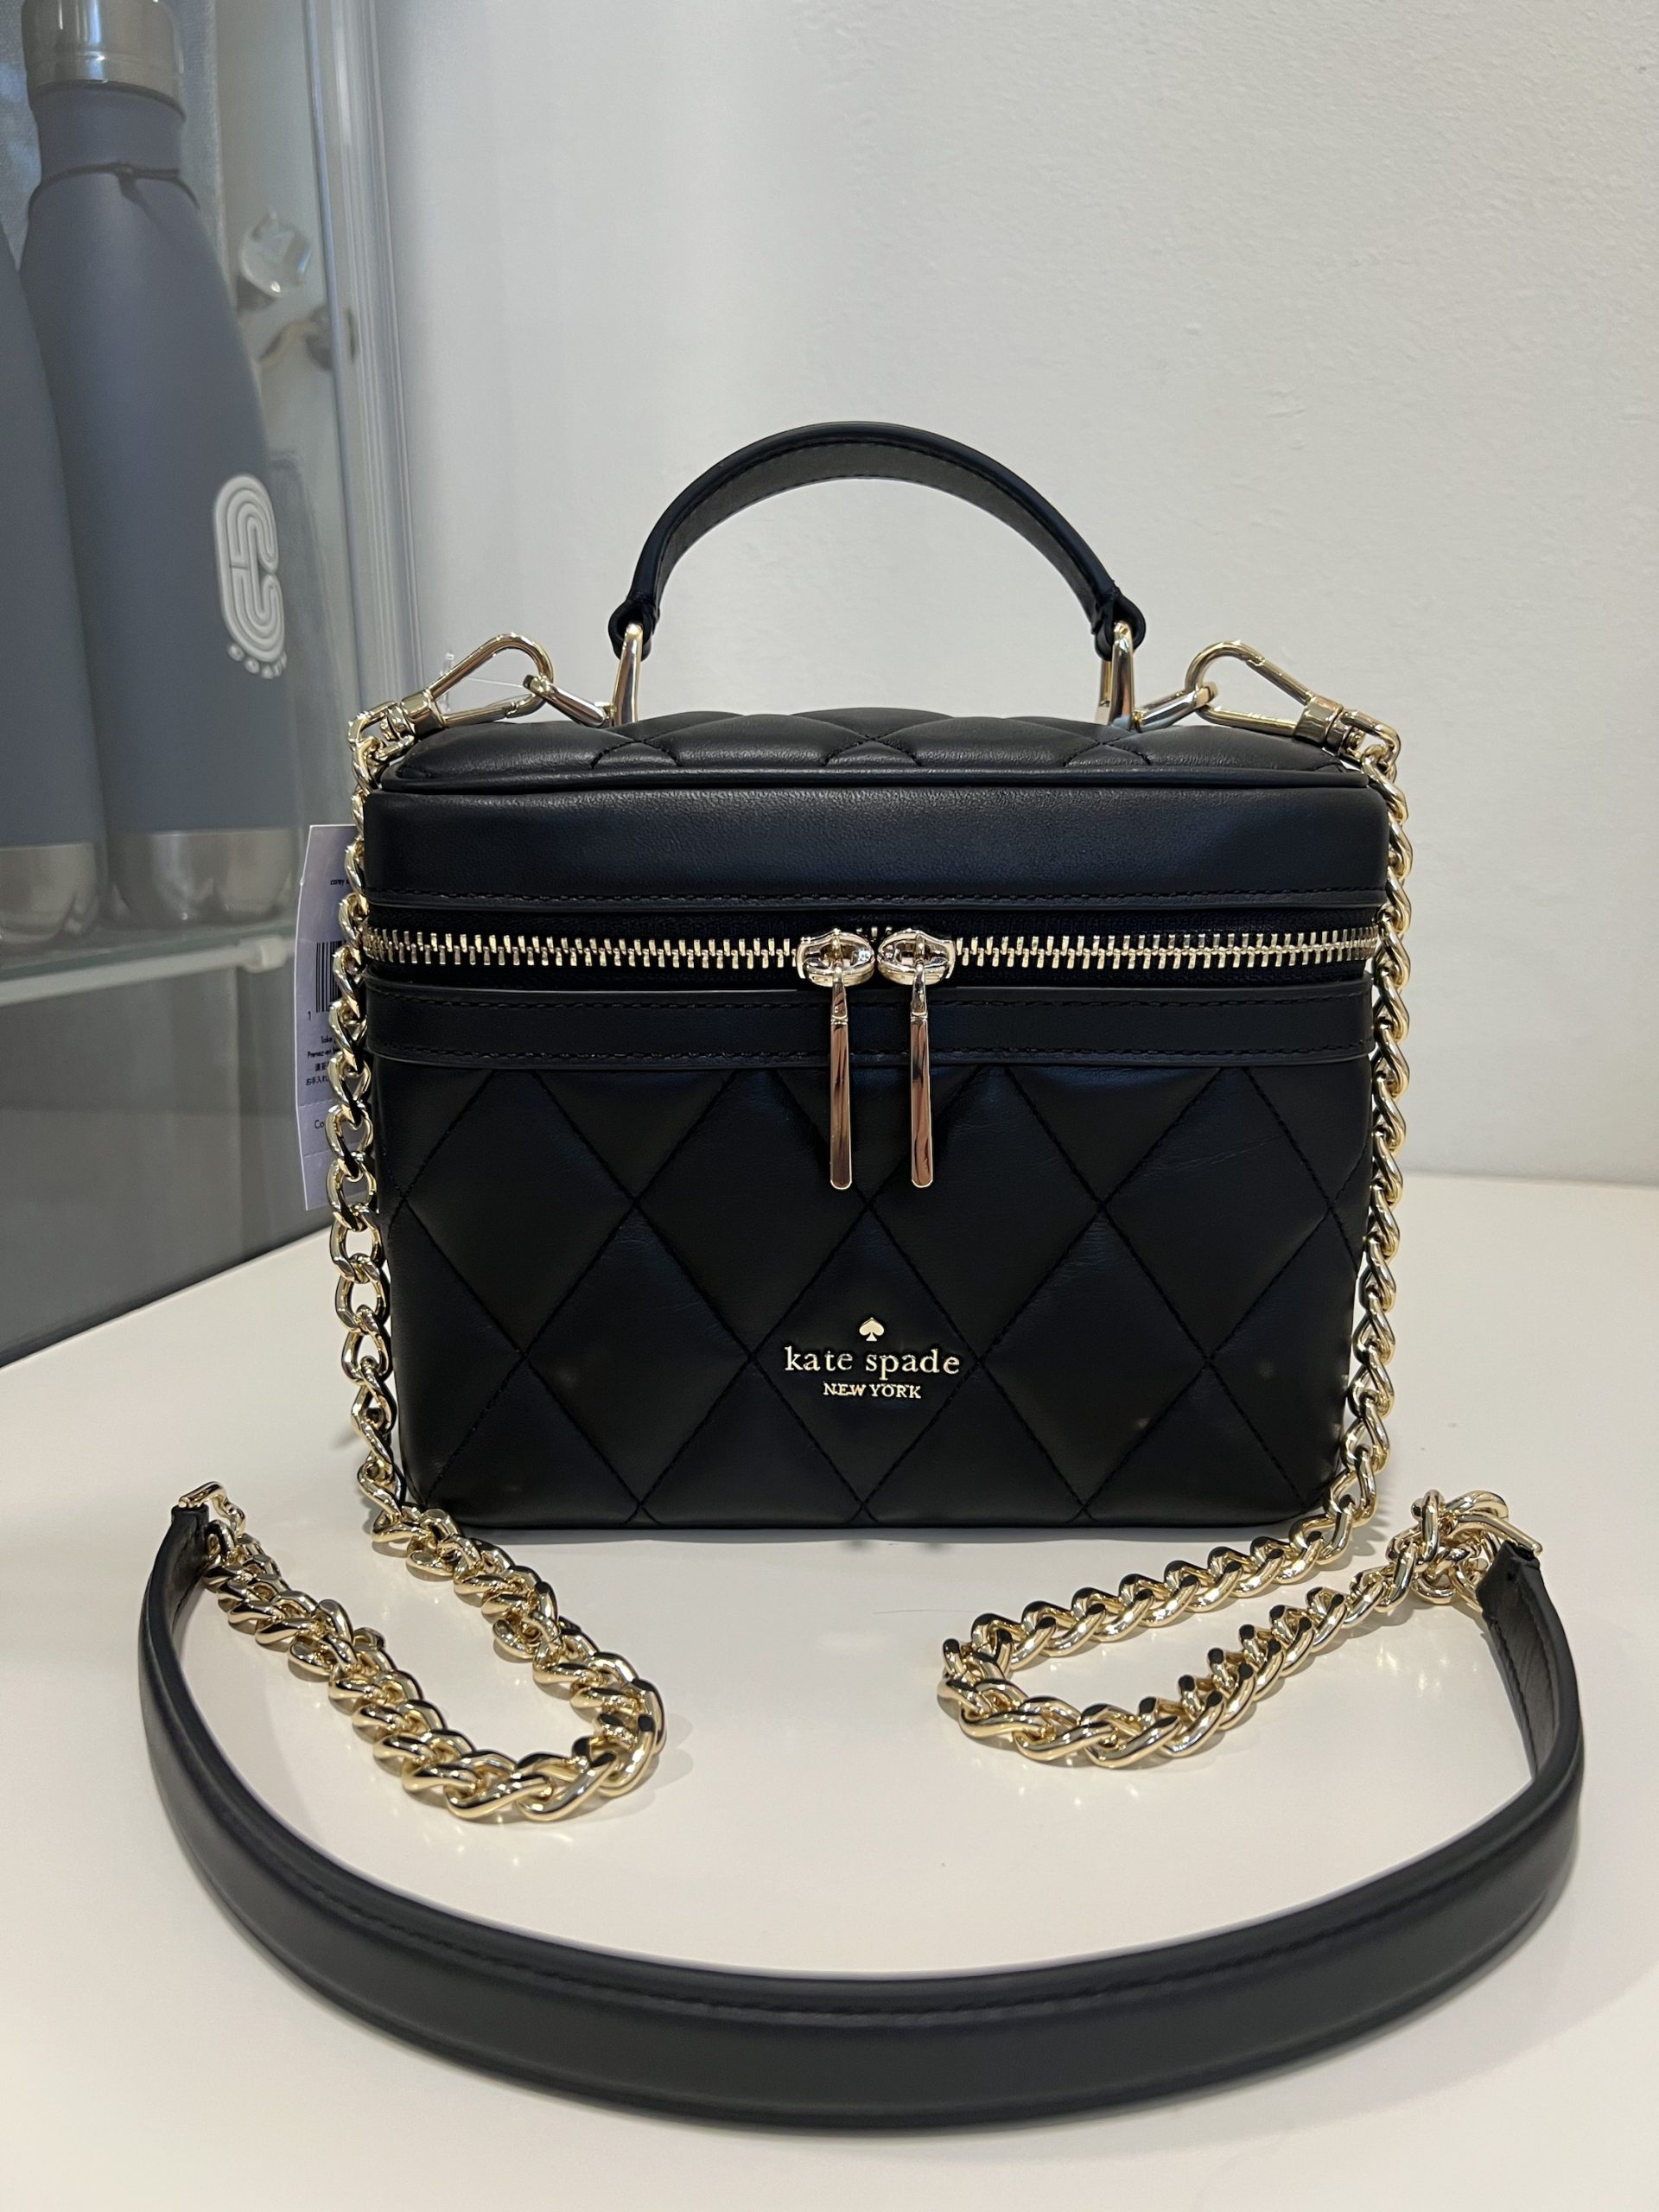 Kate Spade Carey Trunk Crossbody Bag in Black – Exclusively USA